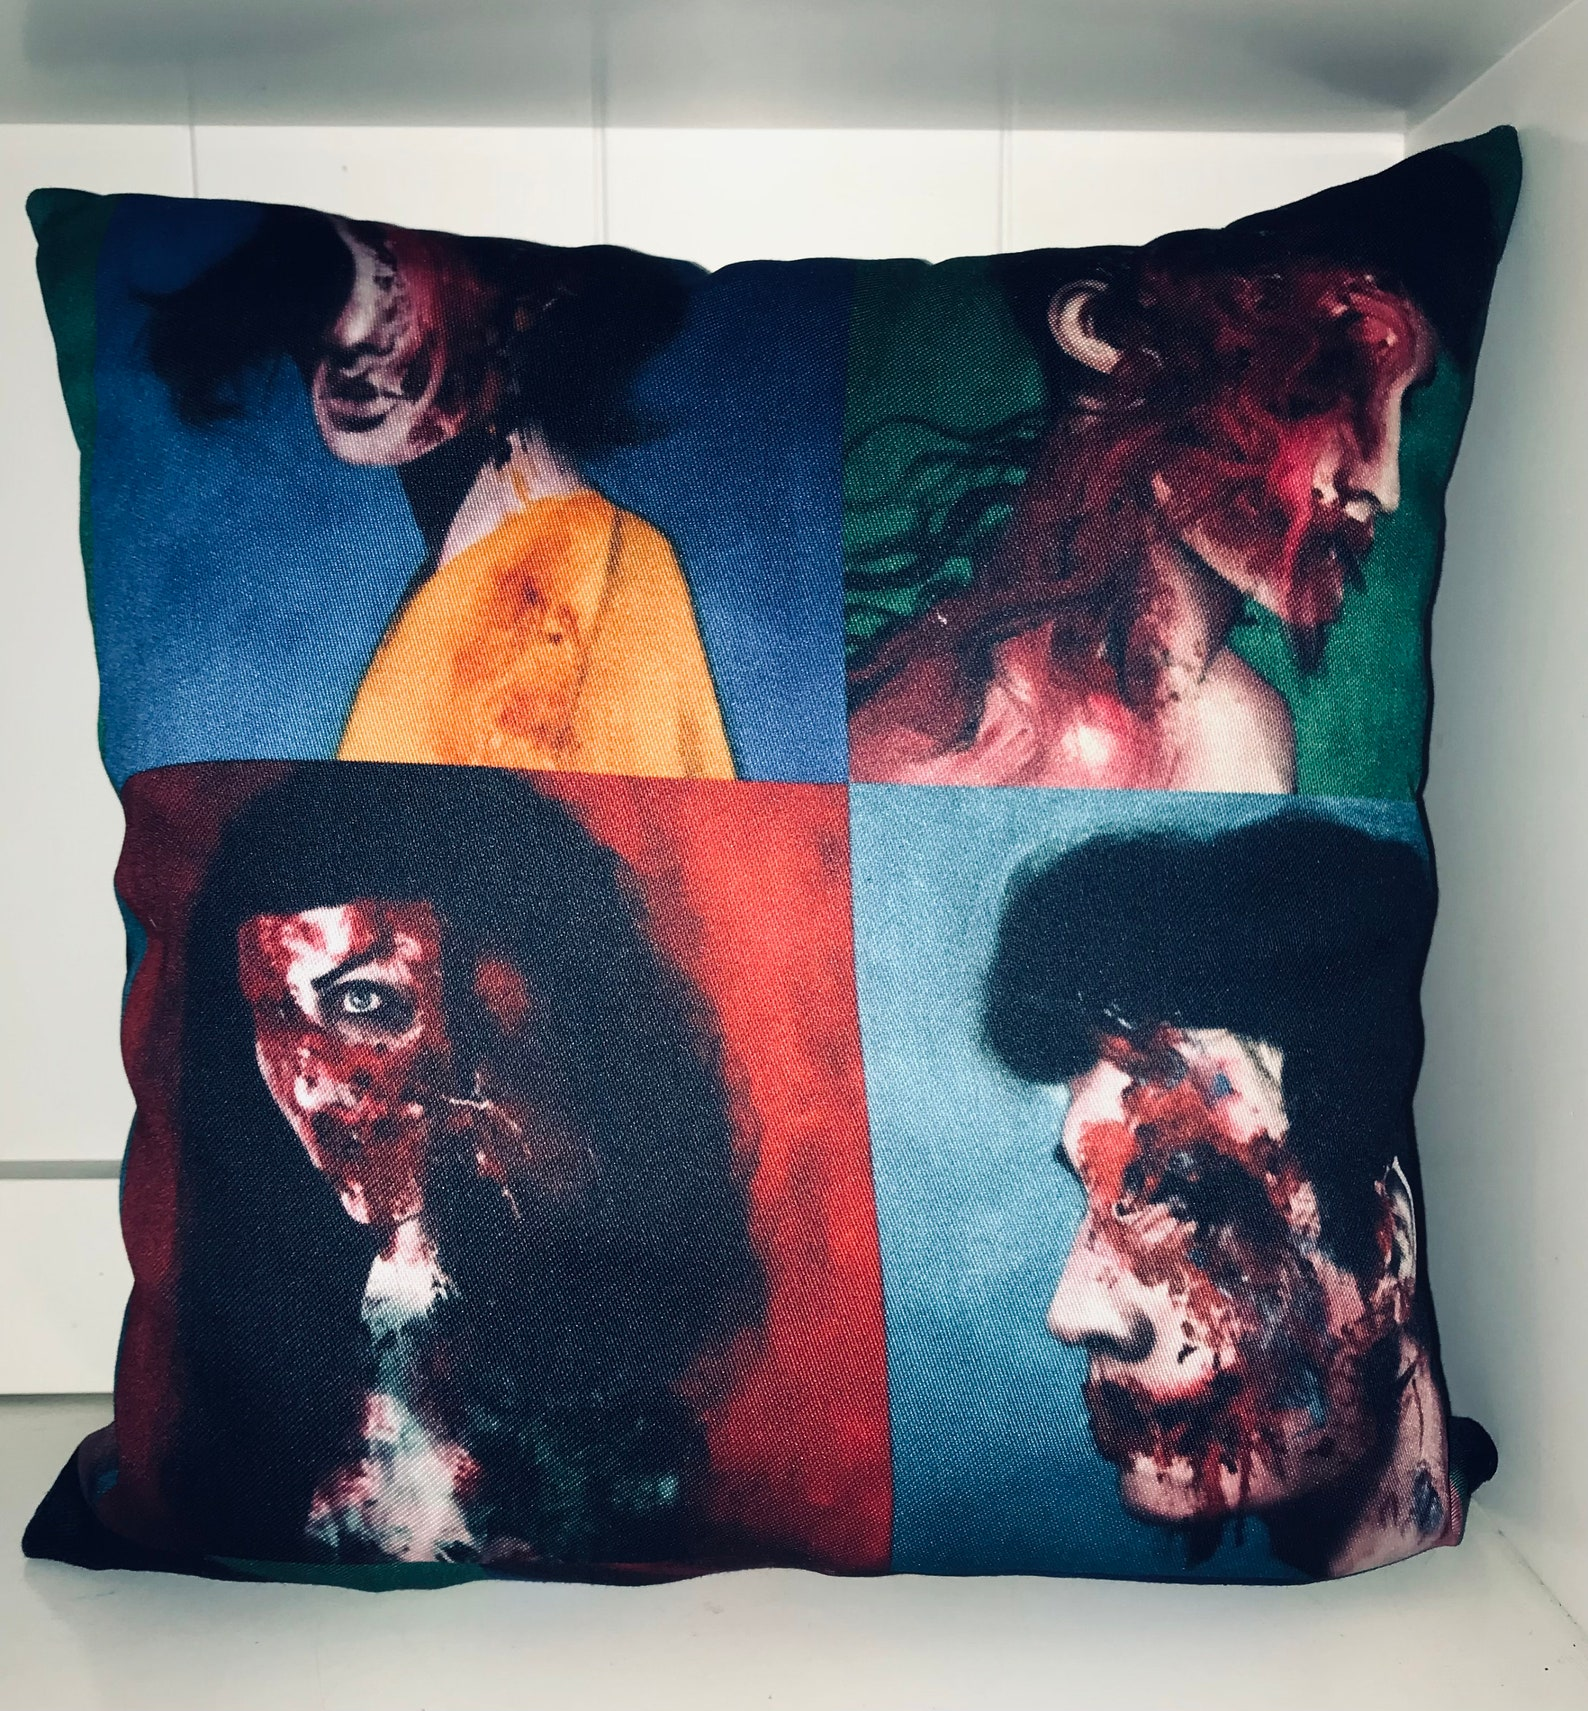 Pillows with bloody faces